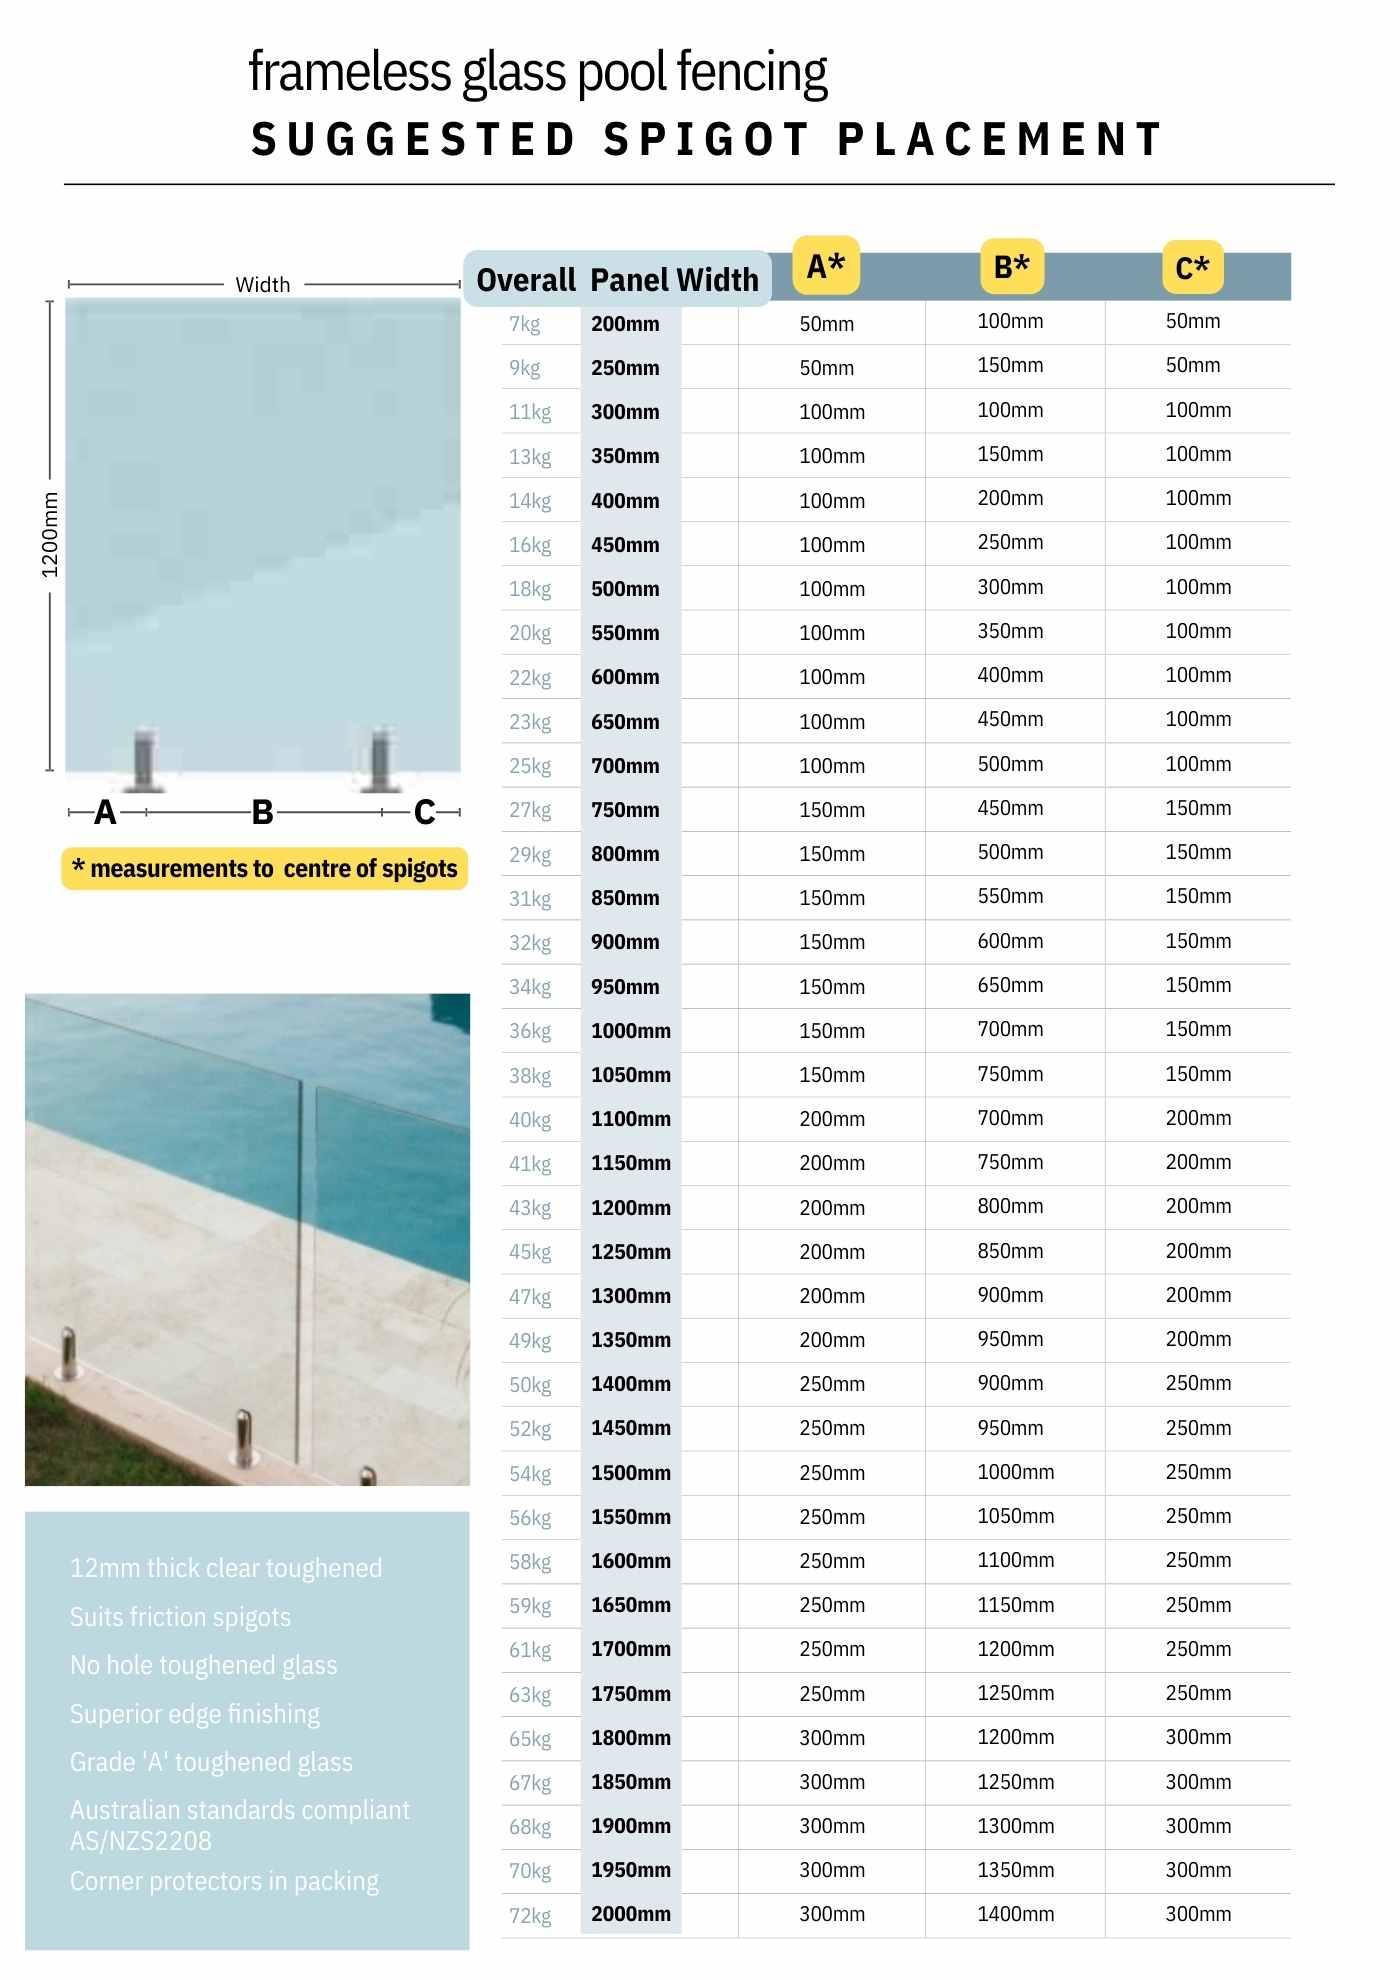 Complete Frameless Glass Spigot Placement Chart (provides measurements for set out of spigots for every size of Pool Glass Panels. The Fast & Easy Pool Glass Spigot Spacing and Placement Table - Fence Guru